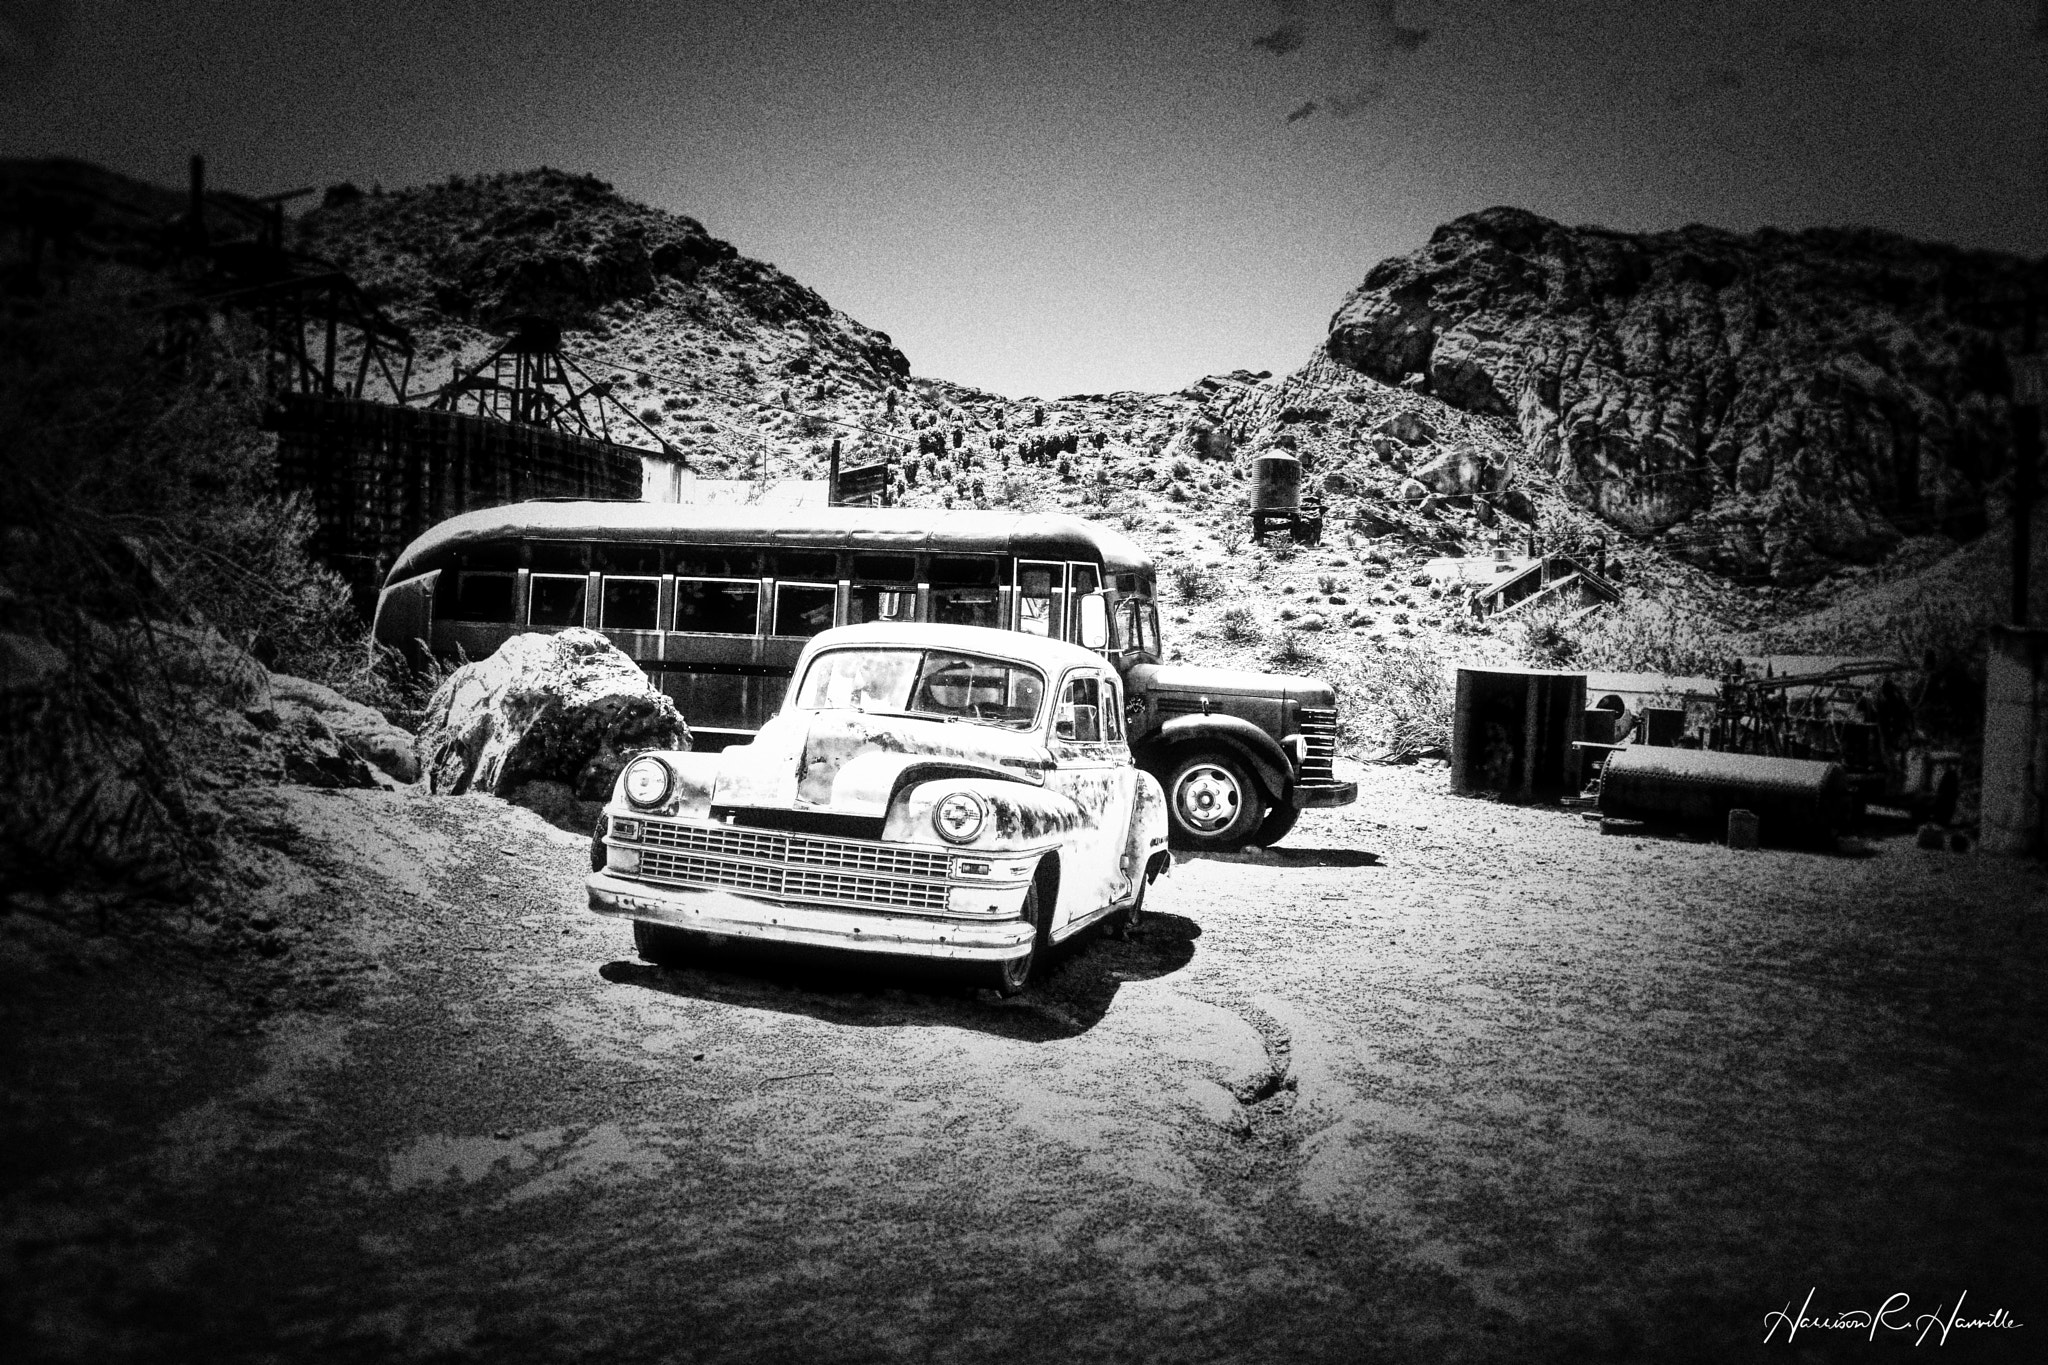 Hasselblad Lunar sample photo. Old chrysler & bus photography